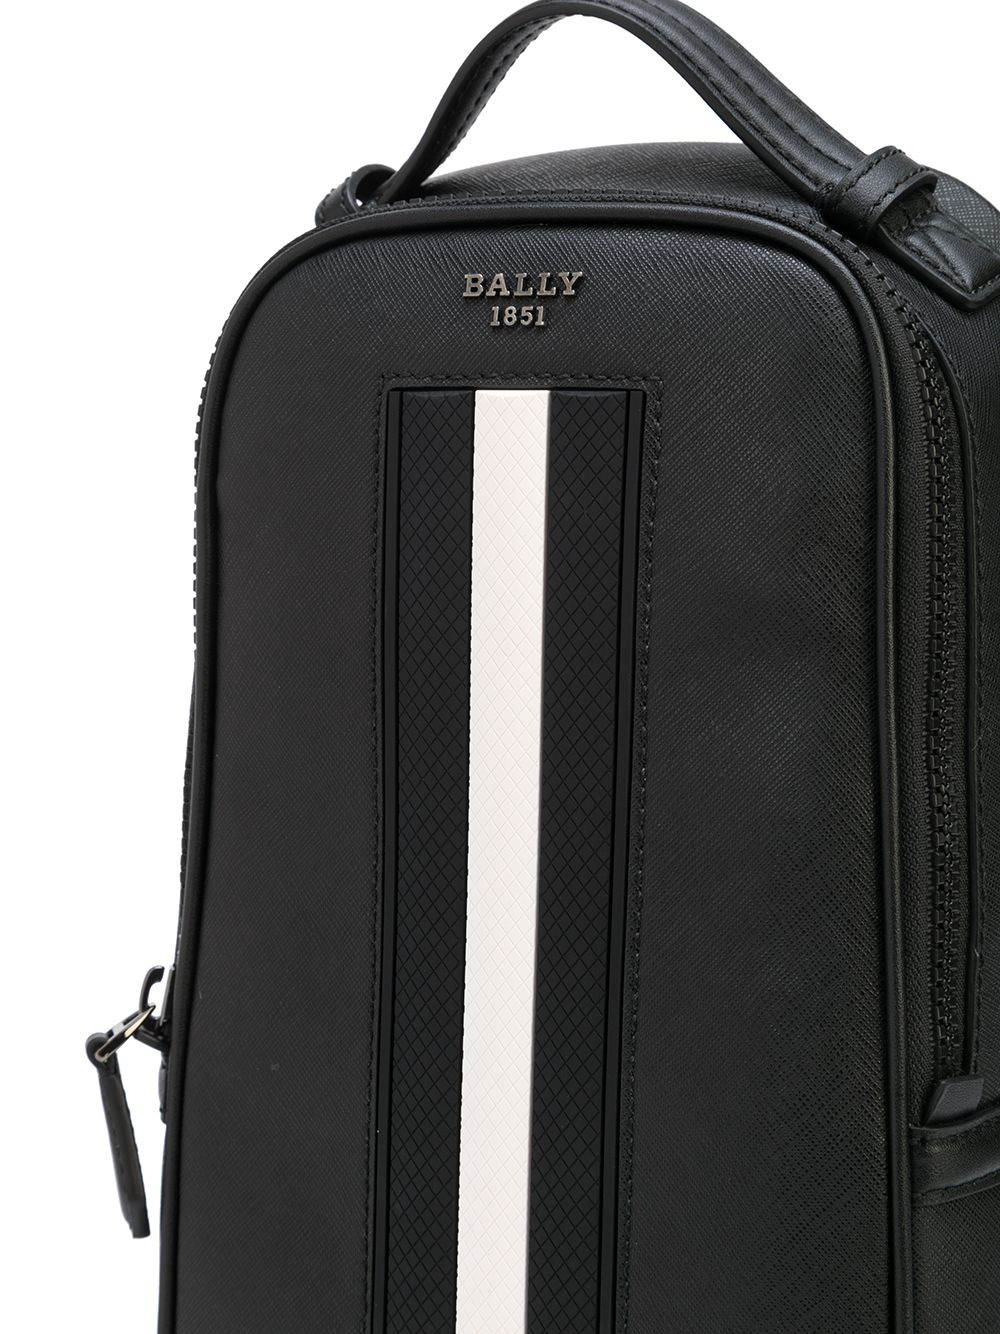 Cross body bags Bally - Clayn quilted bag - 6226903140